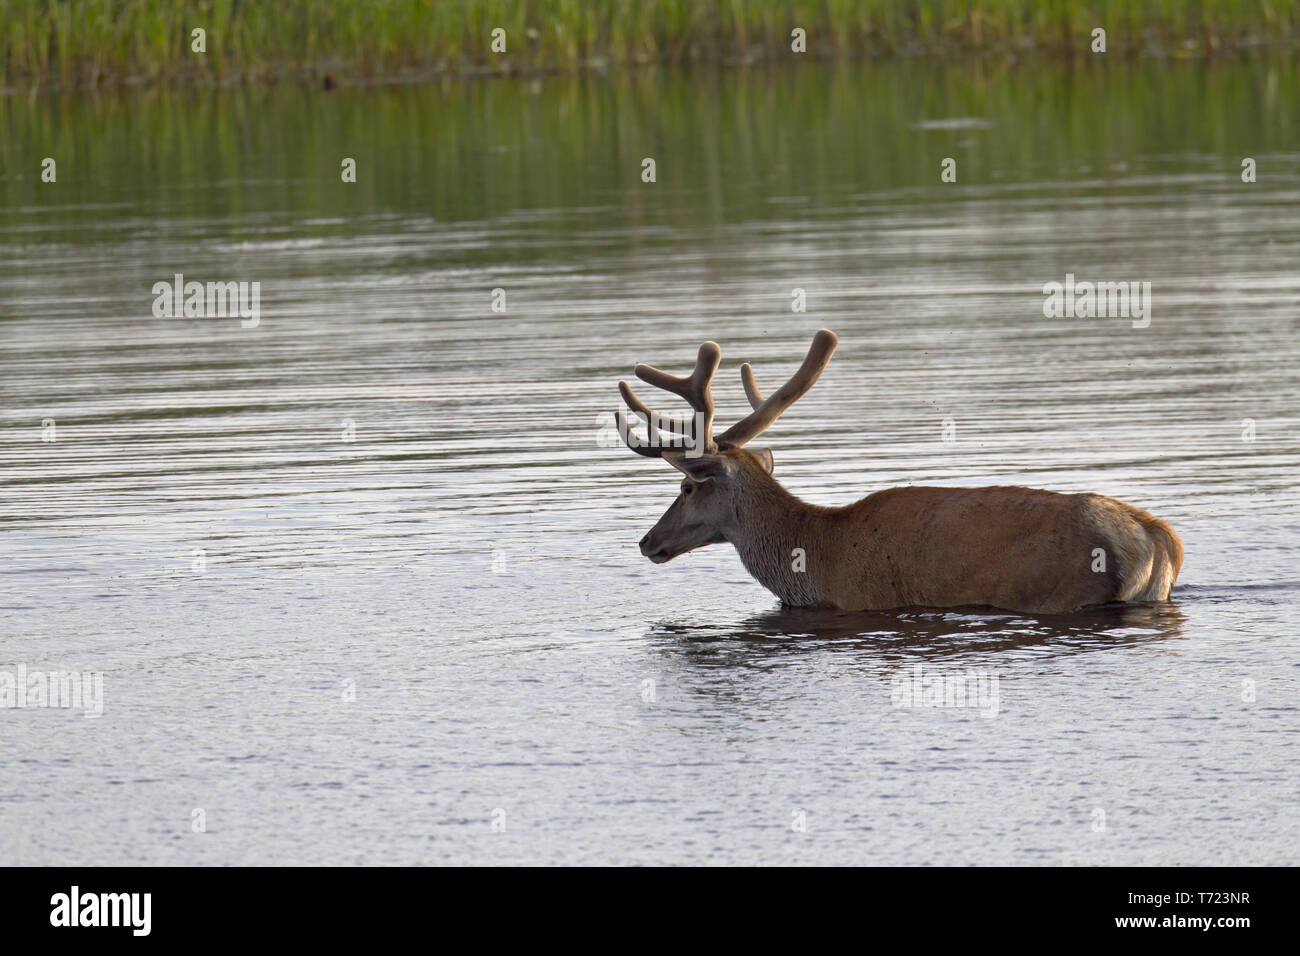 Red stag with velvet-covered antlers in a pond Stock Photo